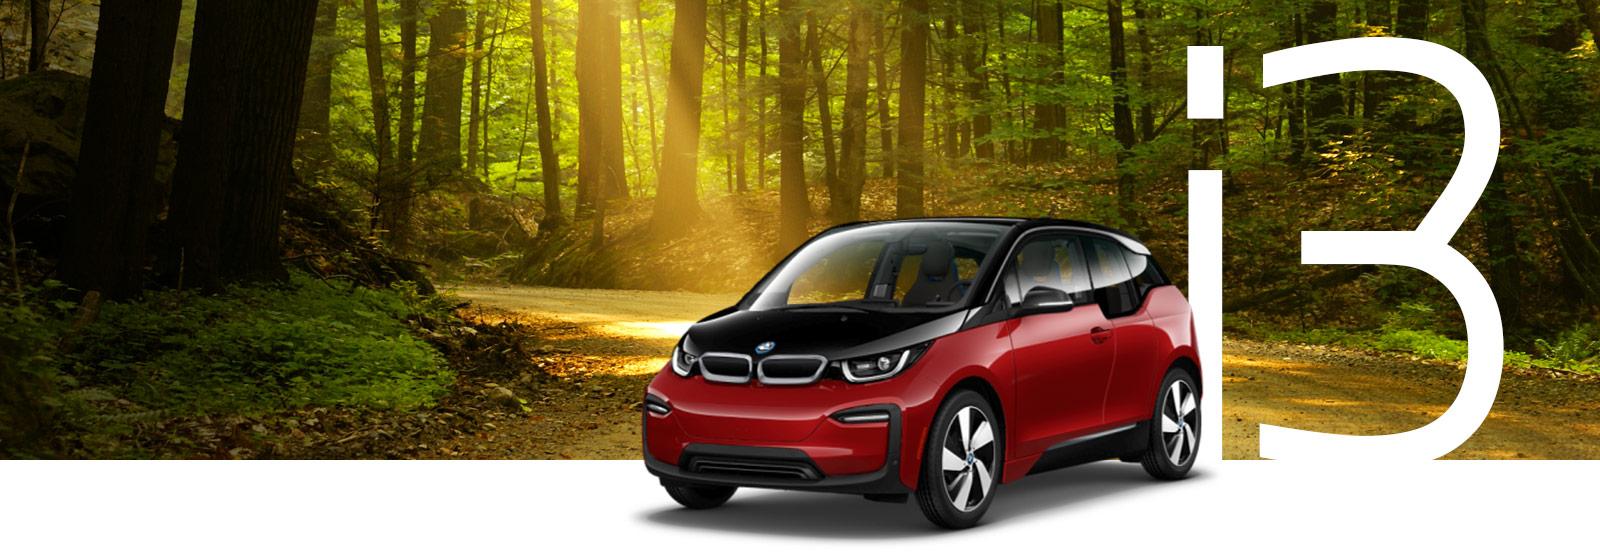 A red BMW i3 in a sunlit forest.